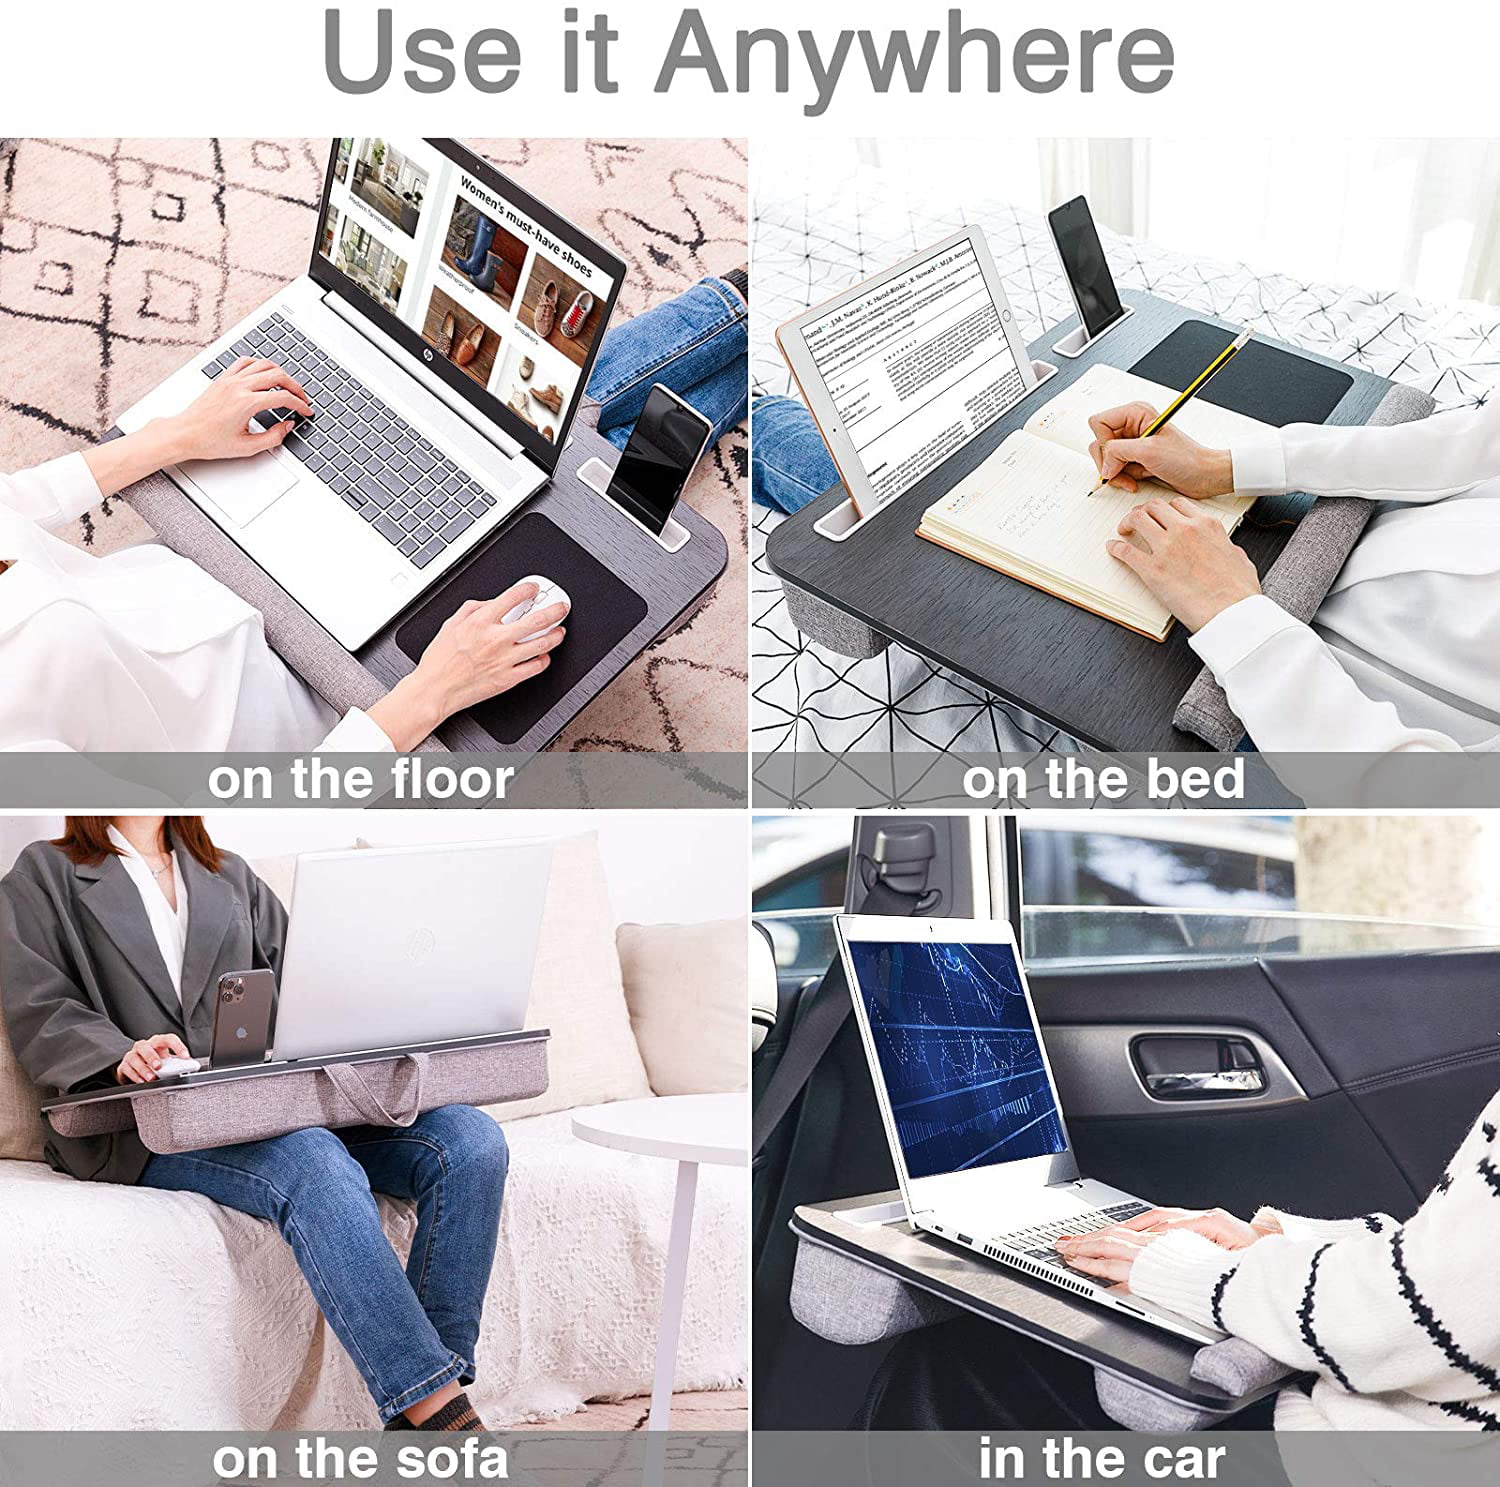 Home Office Portable Laptop Lap Desk with Cushion Mouse Pad,Wrist Pad and Phone Holder Blue Rentliv Lap Desk Fits up to 17 inches Laptop Desk 